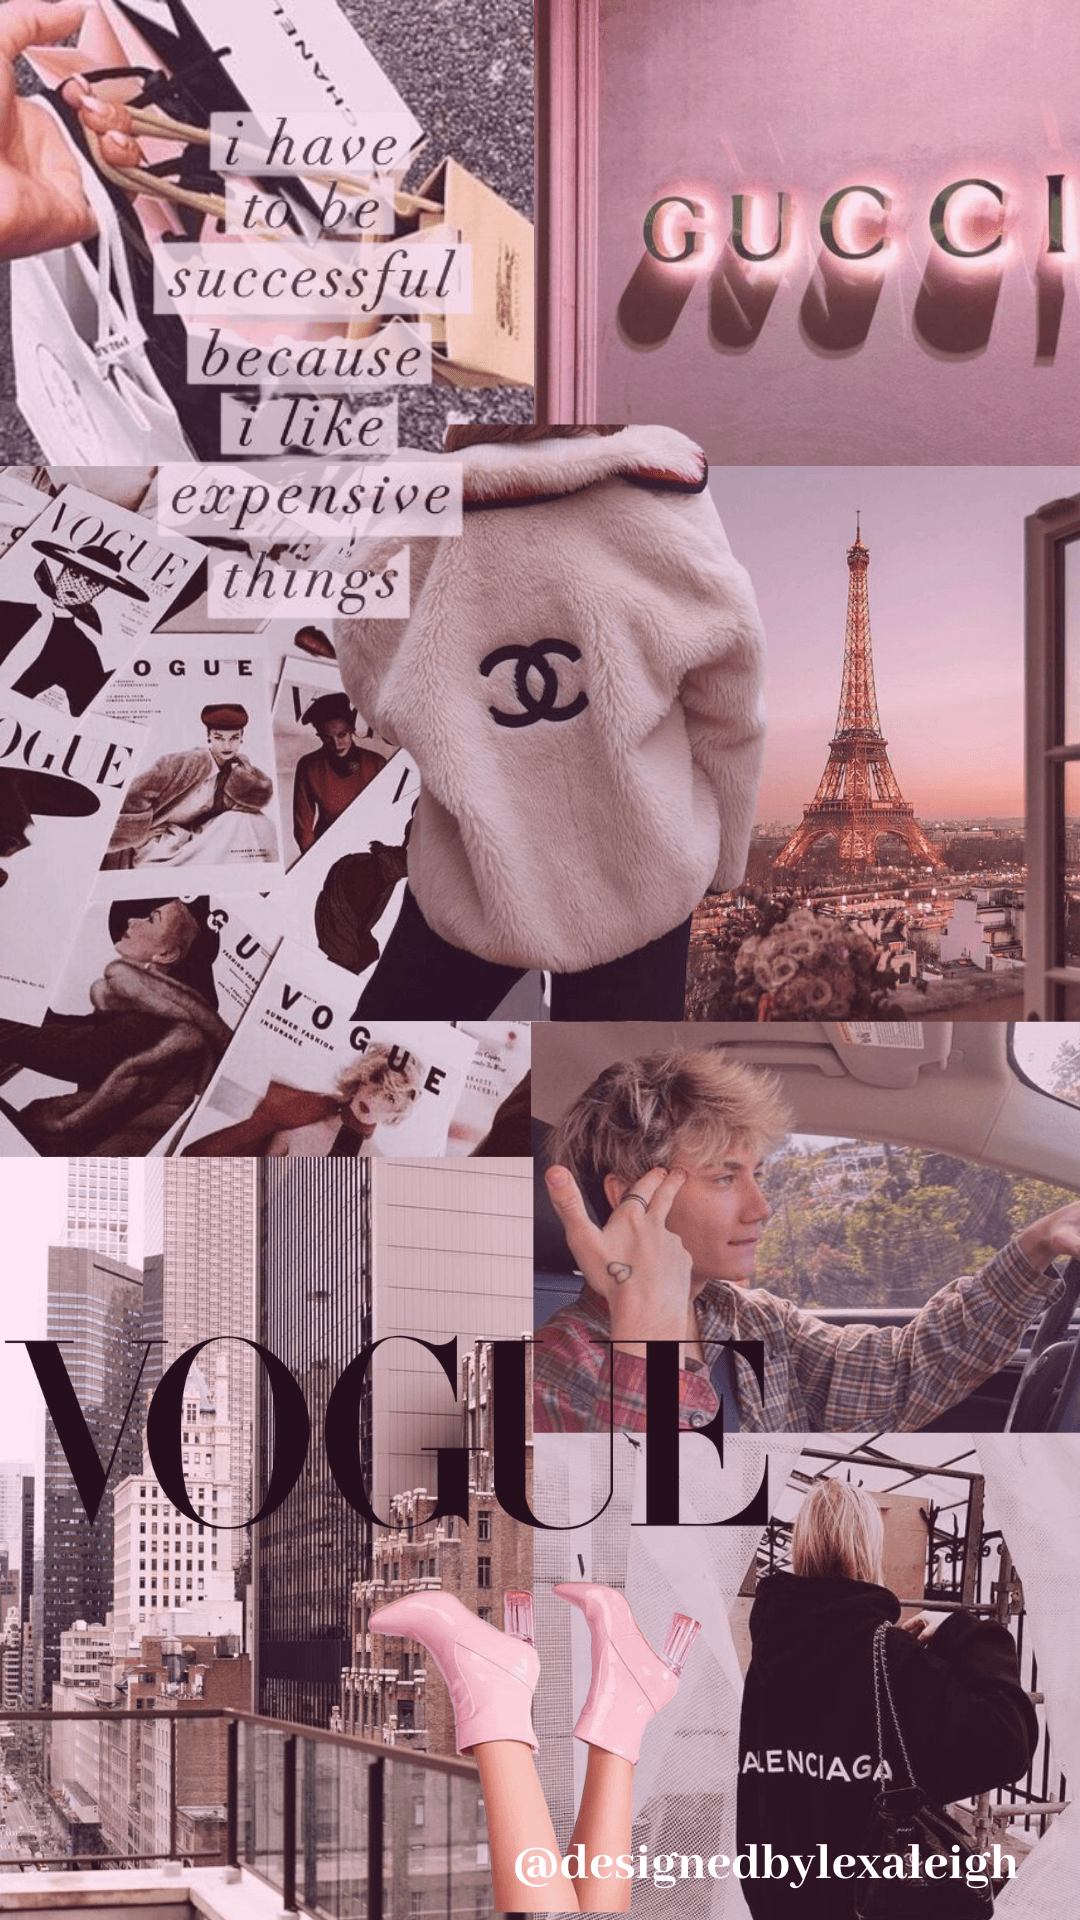 Vogue Aesthetic Wallpaper Free Vogue Aesthetic Background